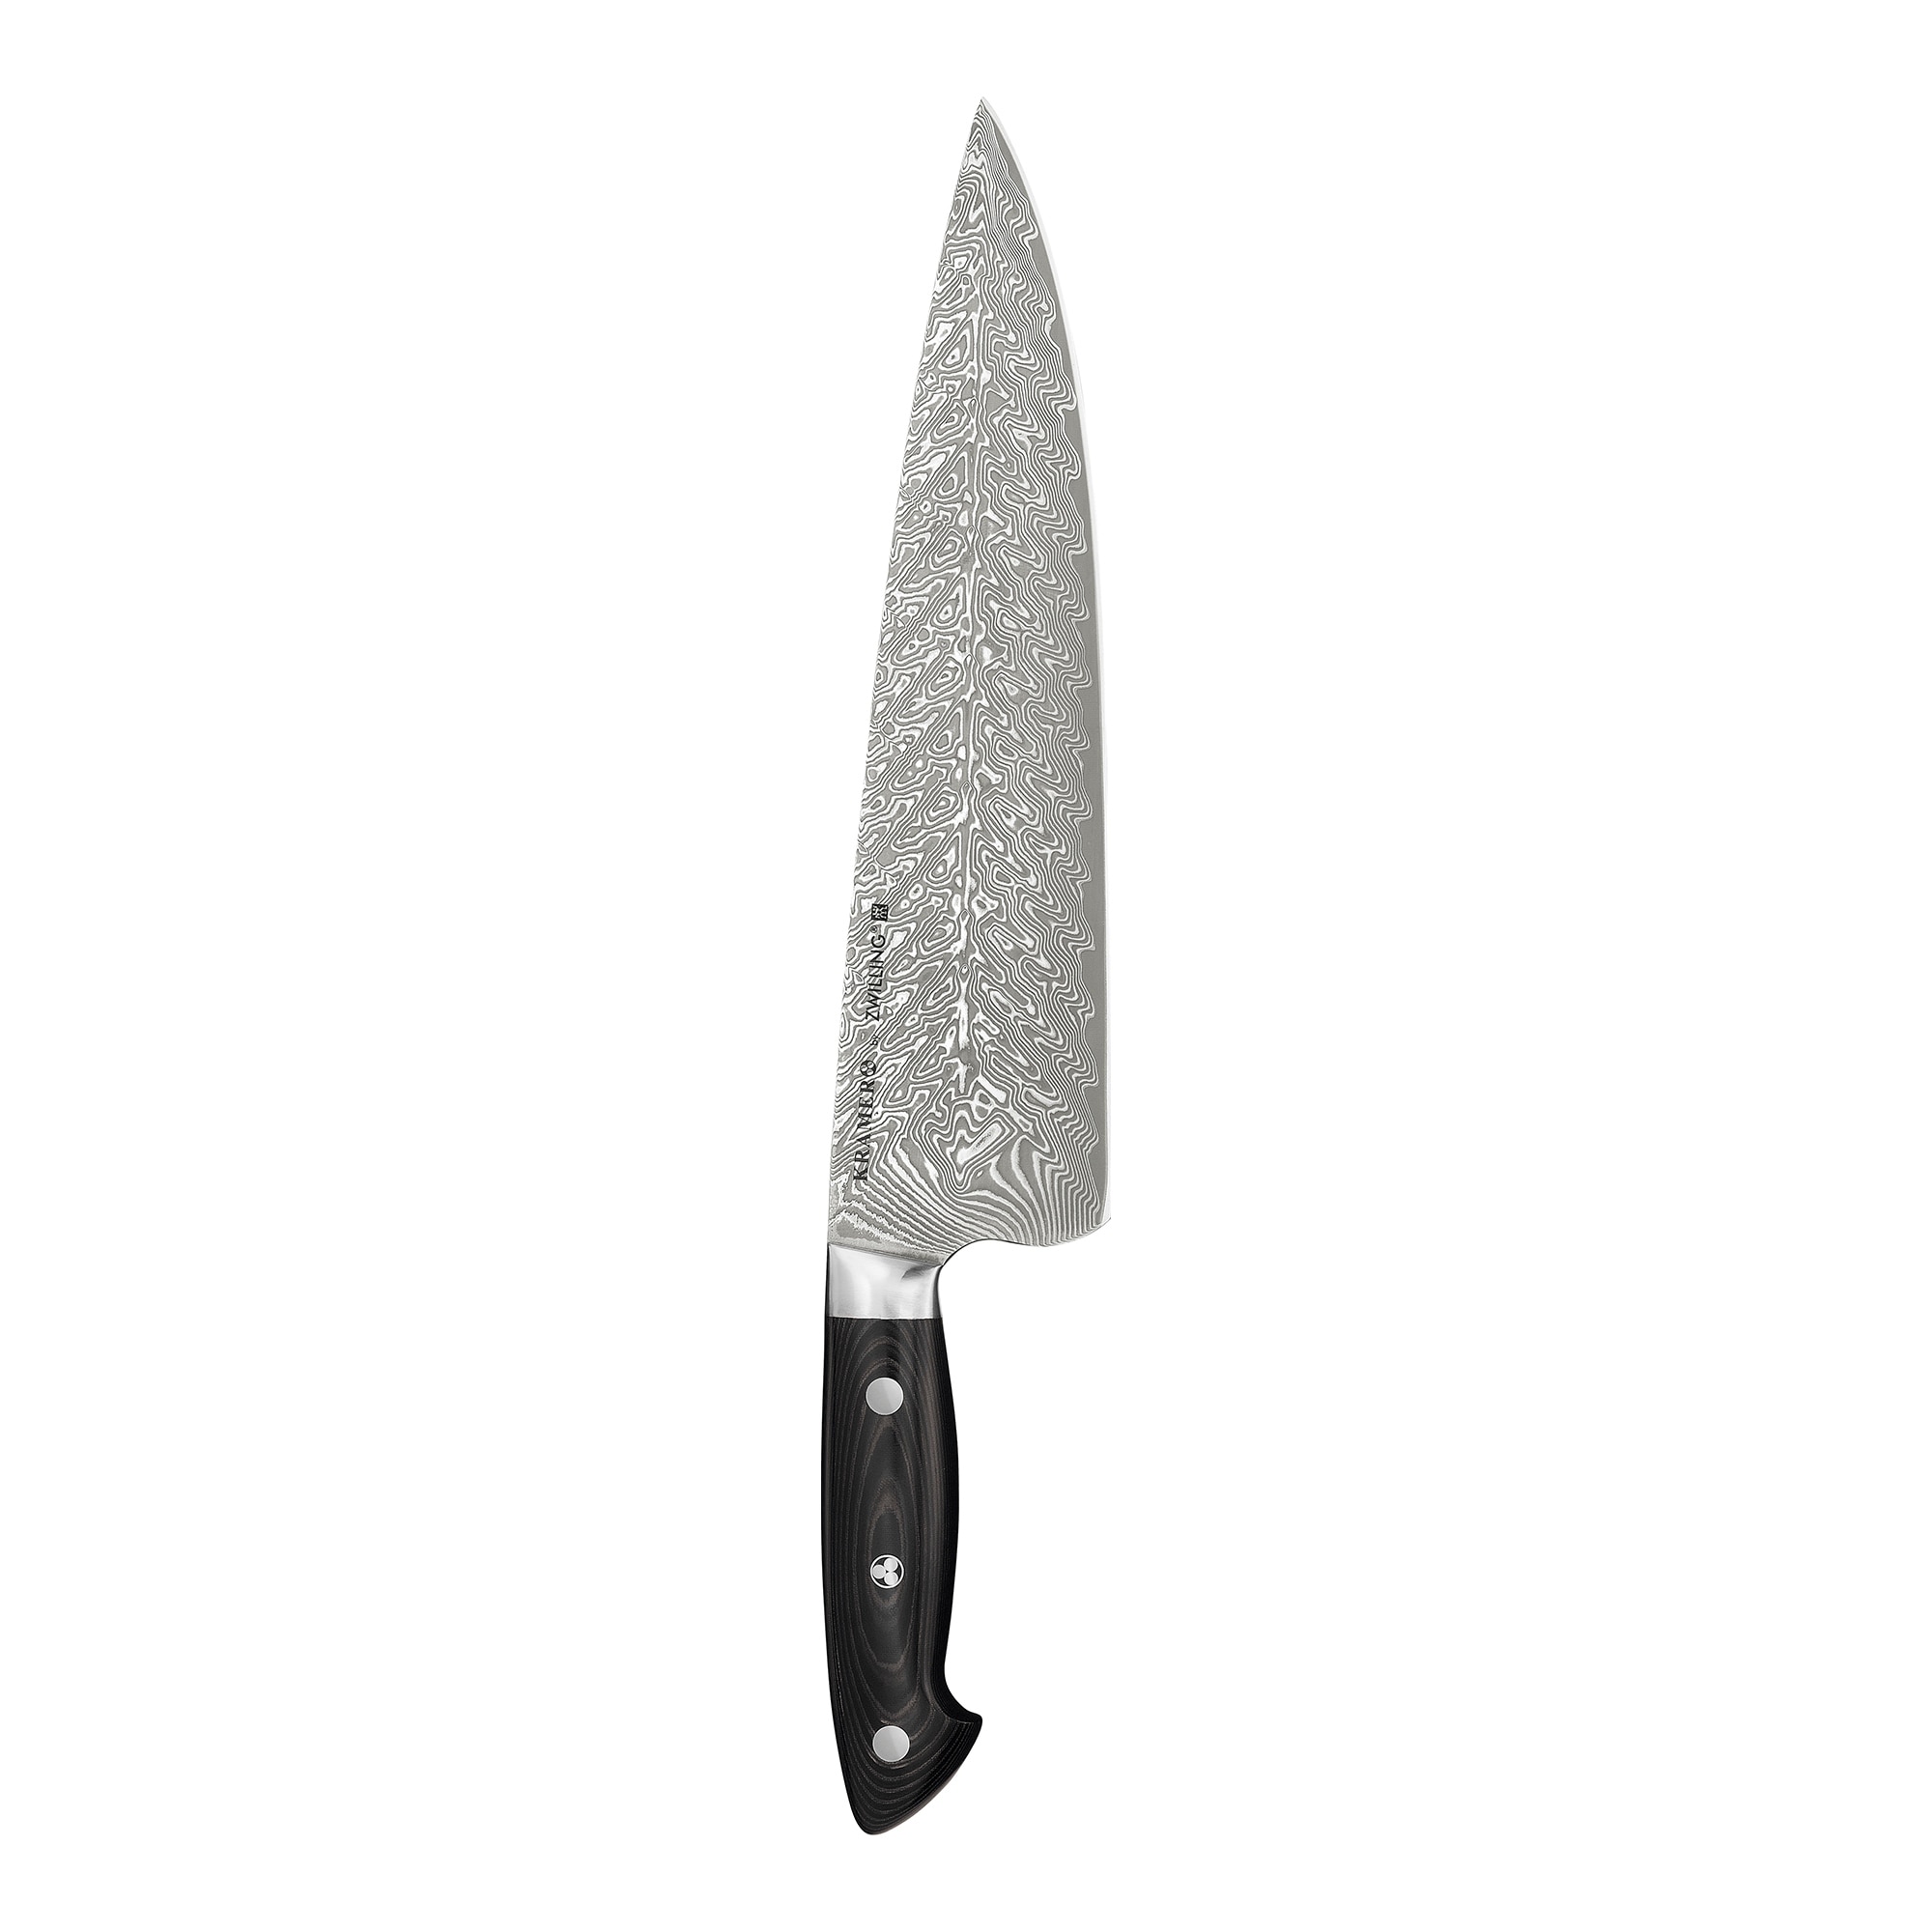 https://ak1.ostkcdn.com/images/products/is/images/direct/2202c07381532f76a8666649dd280aaa30fdfd0d/KRAMER-by-ZWILLING-EUROLINE-Damascus-Collection-Chef%27s-Knife.jpg